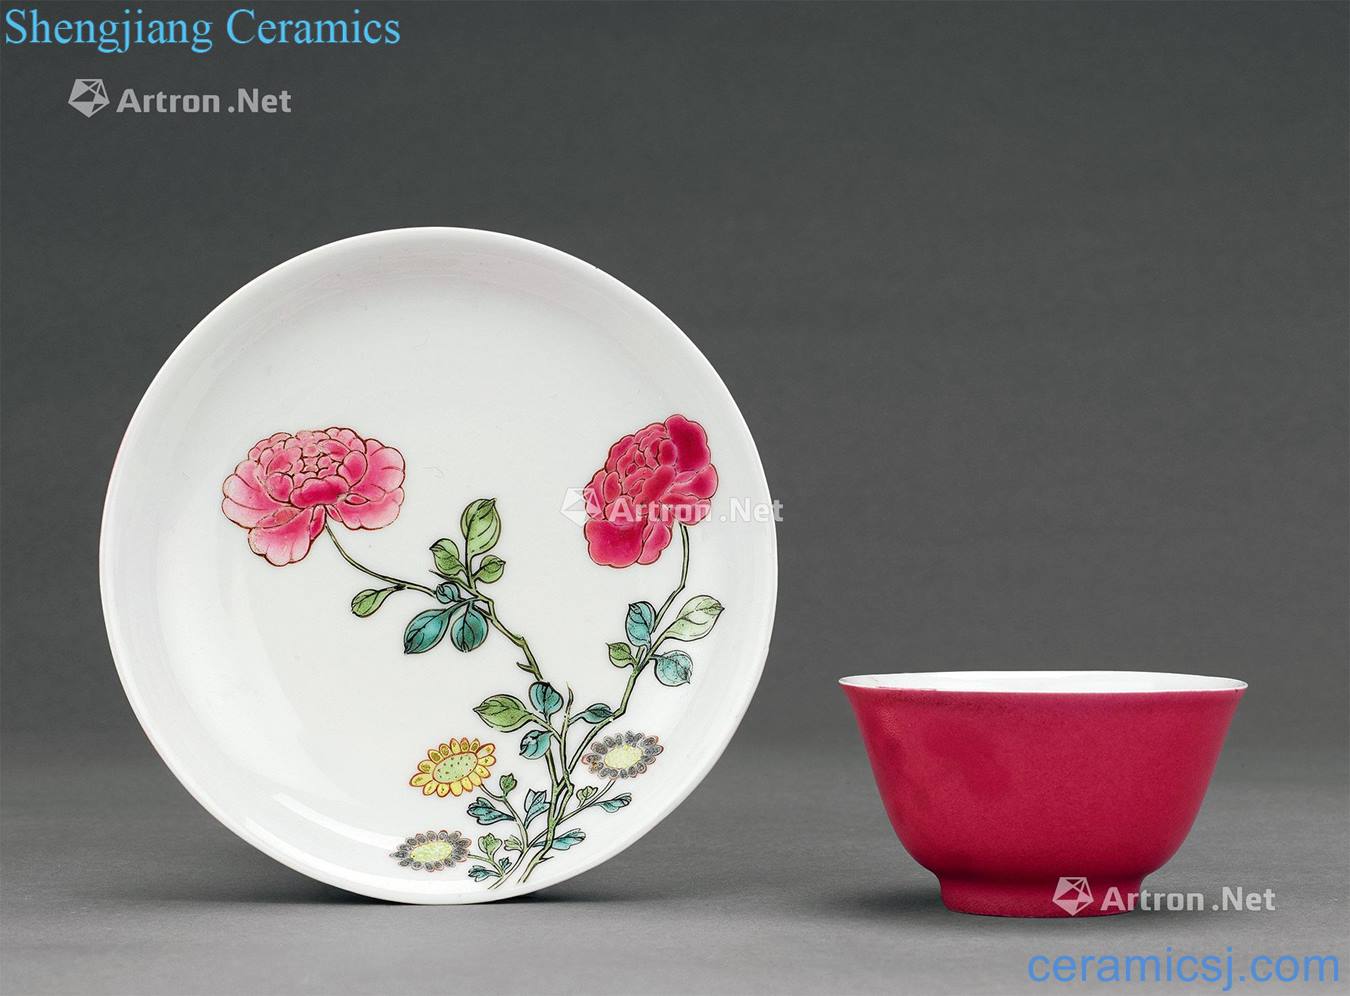 Outside the qing yongzheng carmine pastel flowers lines within the cup and dish (a)